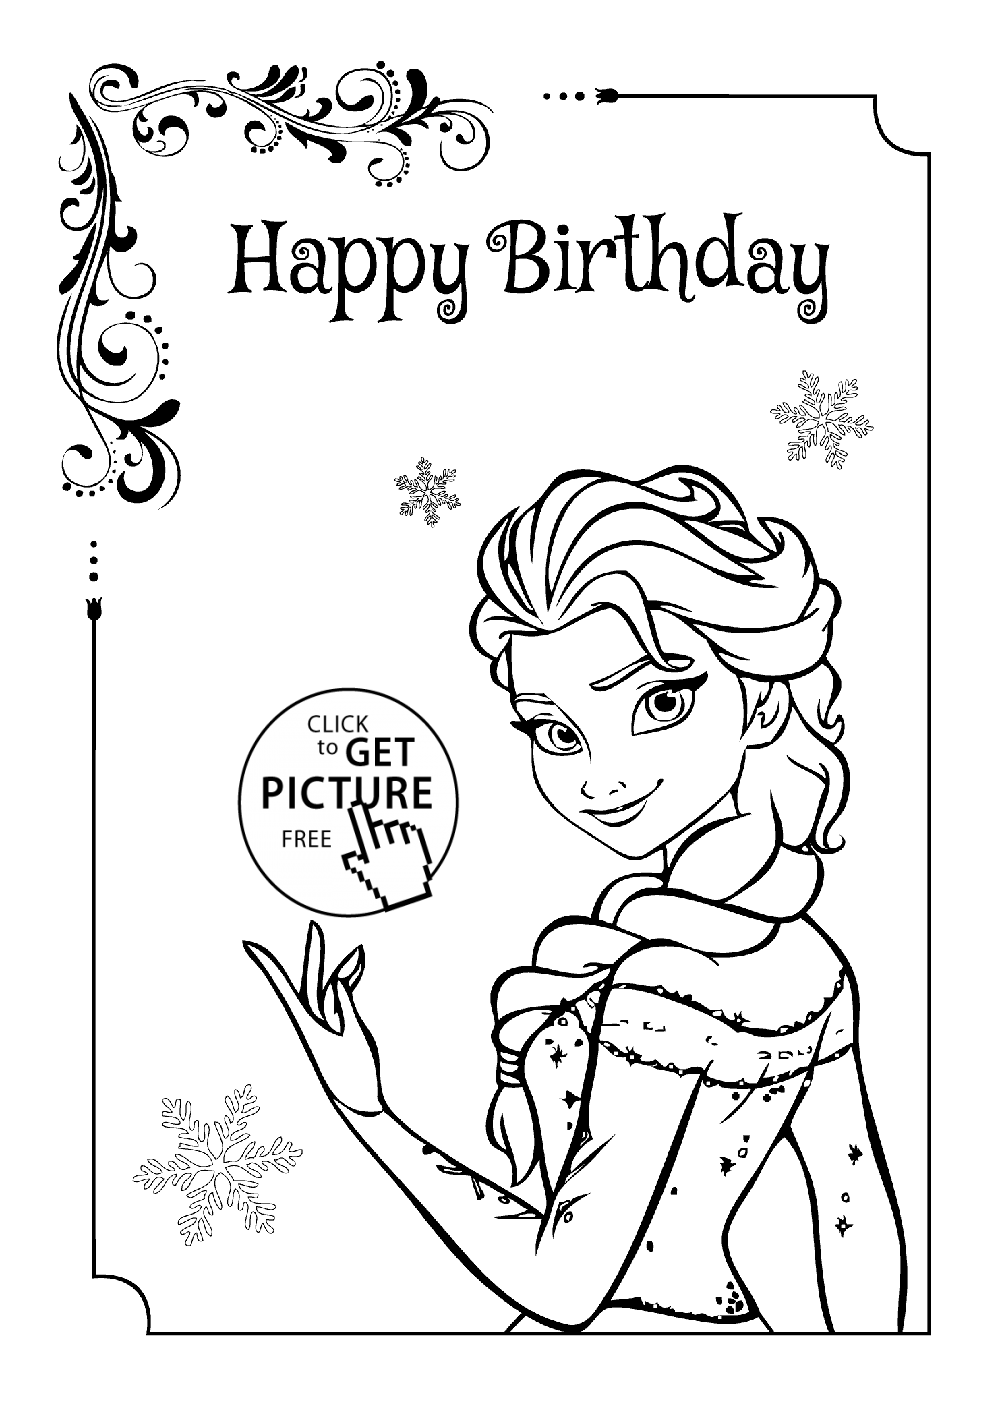 Frozen Black and White Logo - Happy Birthday - Frozen personalized coloring page